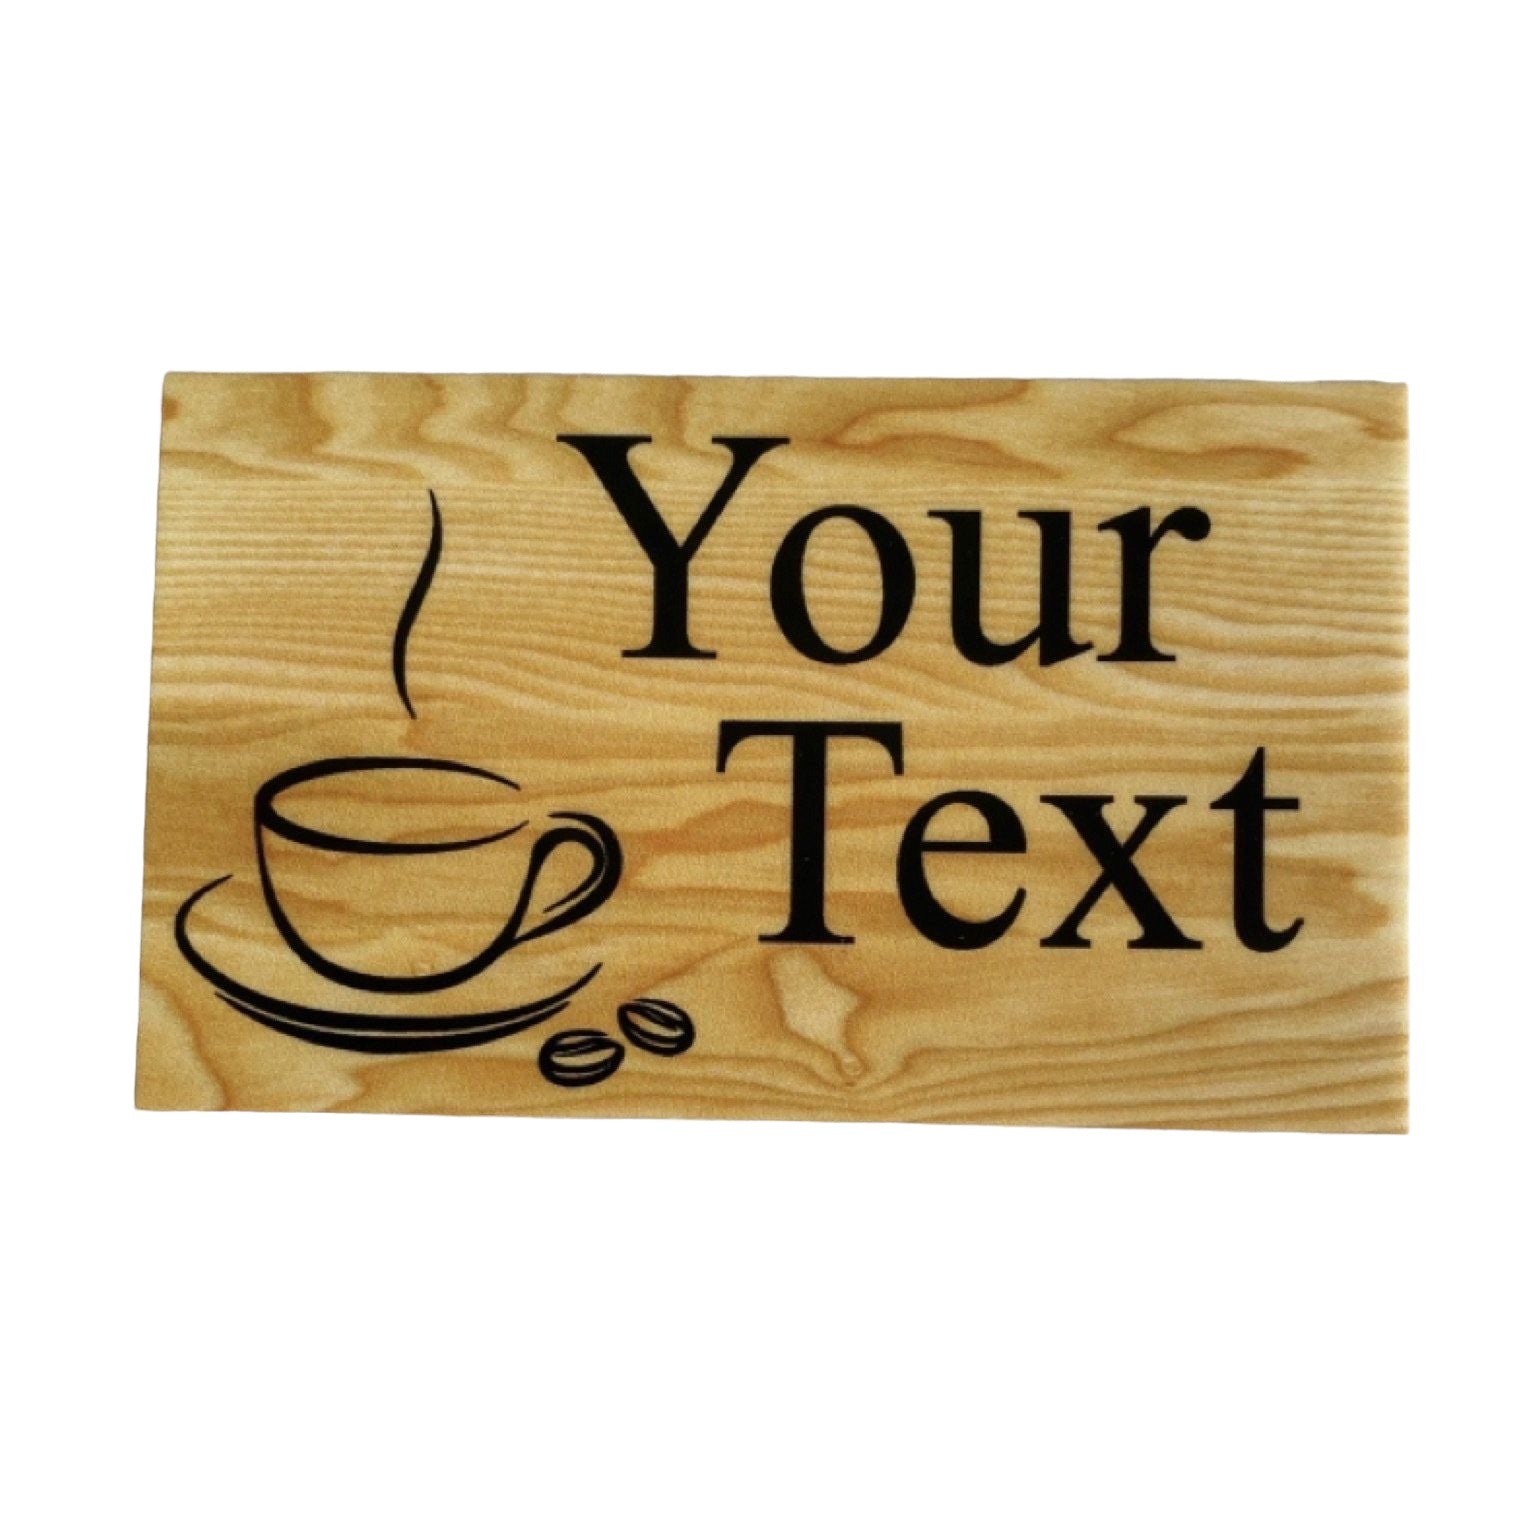 Coffee Café Rustic Personalised Custom Sign - The Renmy Store Homewares & Gifts 